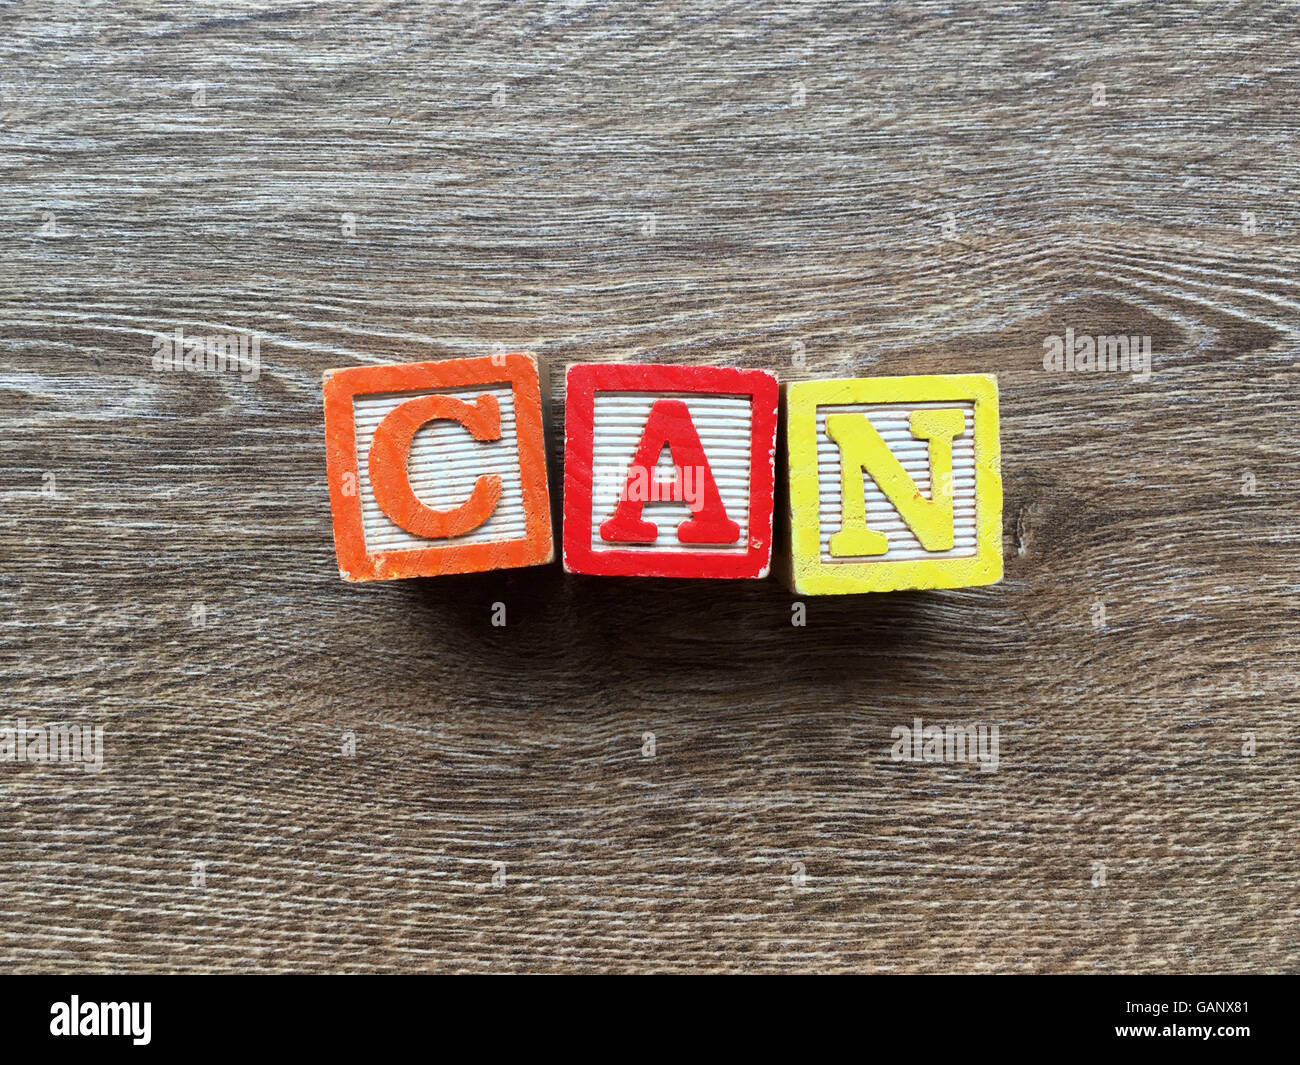 CAN word made with toy wood blocks letters Stock Photo